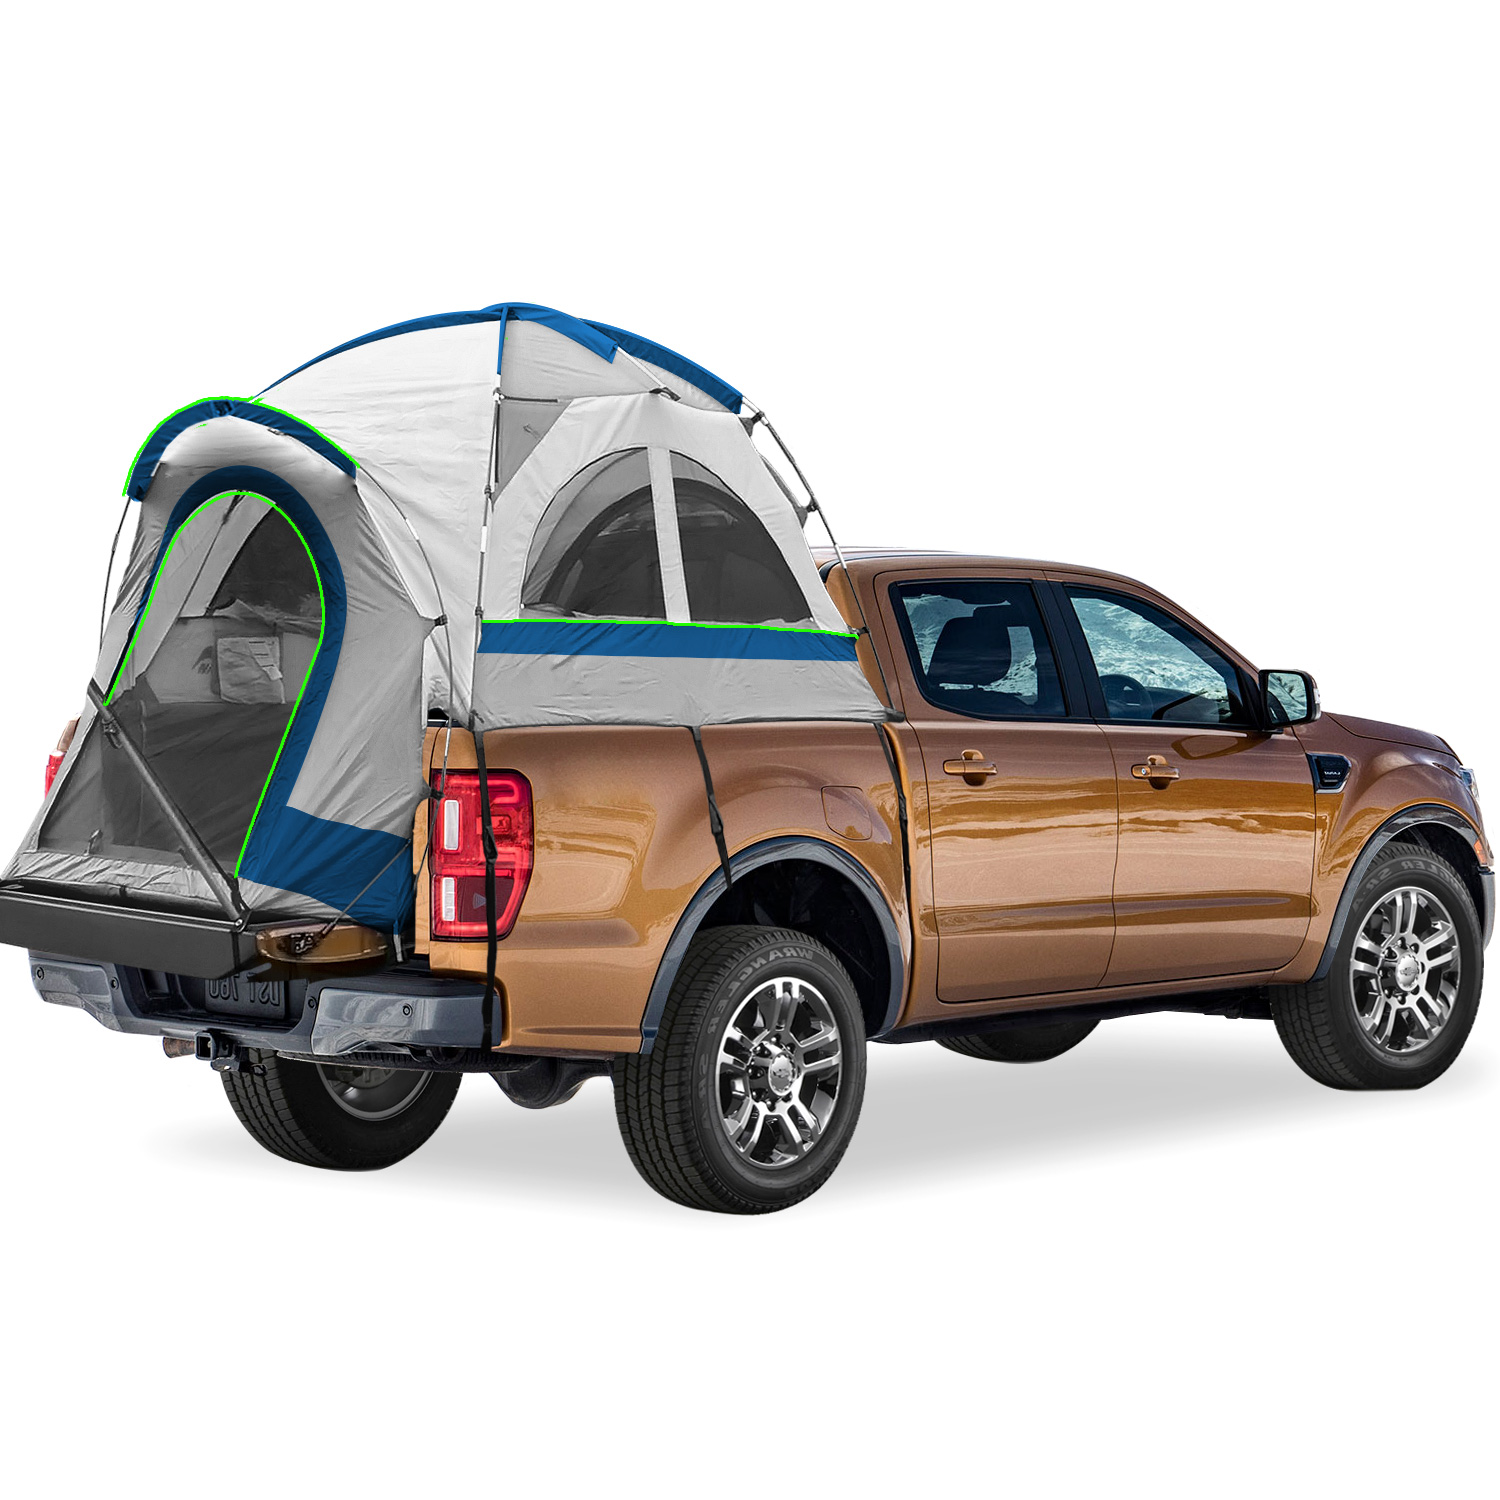 North East Harbor Pickup Truck Bed Camping Tent, 2-Person Sleeping Capacity, Includes Rainfly and Storage Bag - Fits Compact Truck with Regular